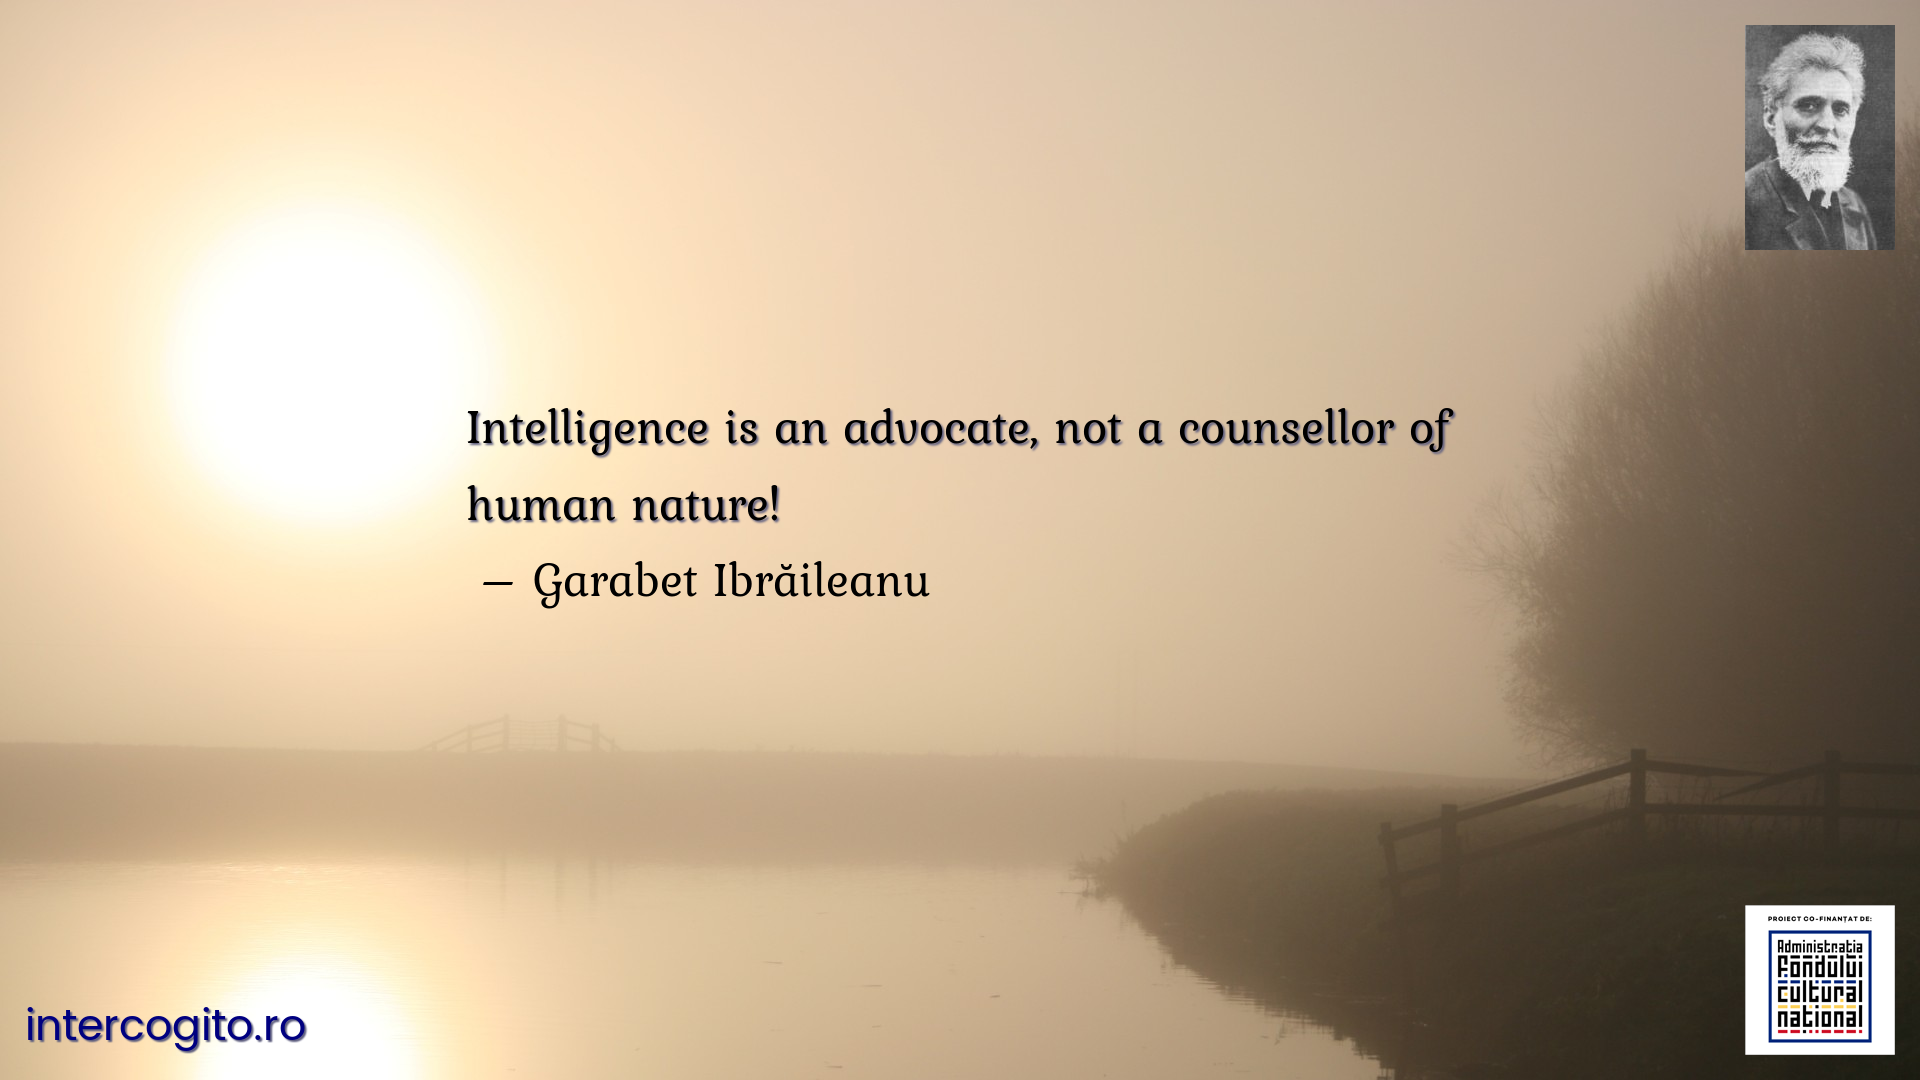 Intelligence is an advocate, not a counsellor of human nature!